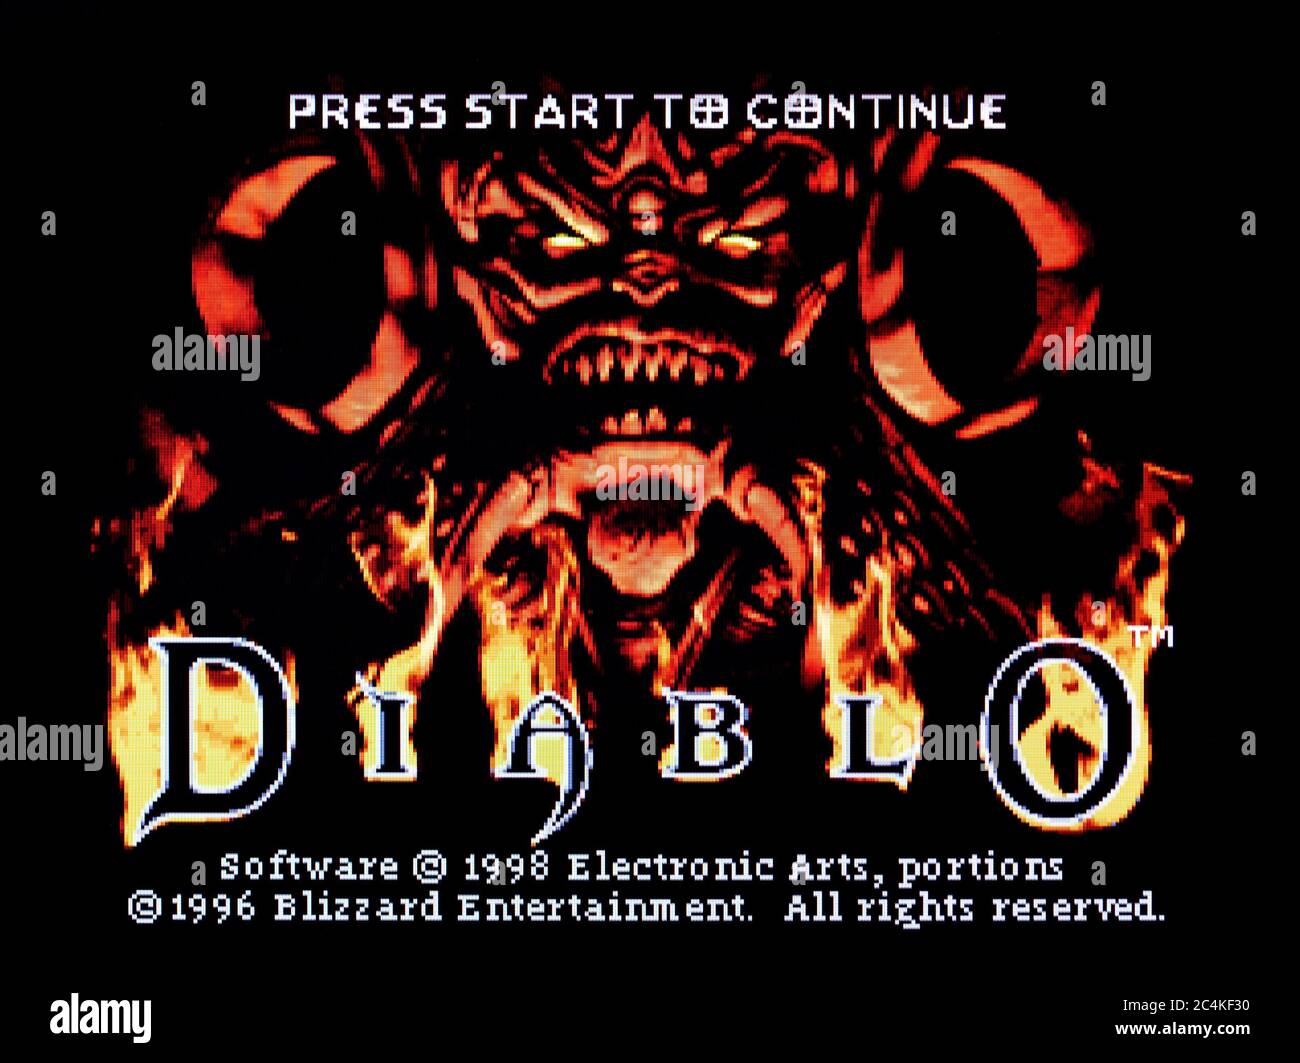 Diablo - Sony Playstation 1 PS1 PSX - Editorial use only Stock Photo - Alamy